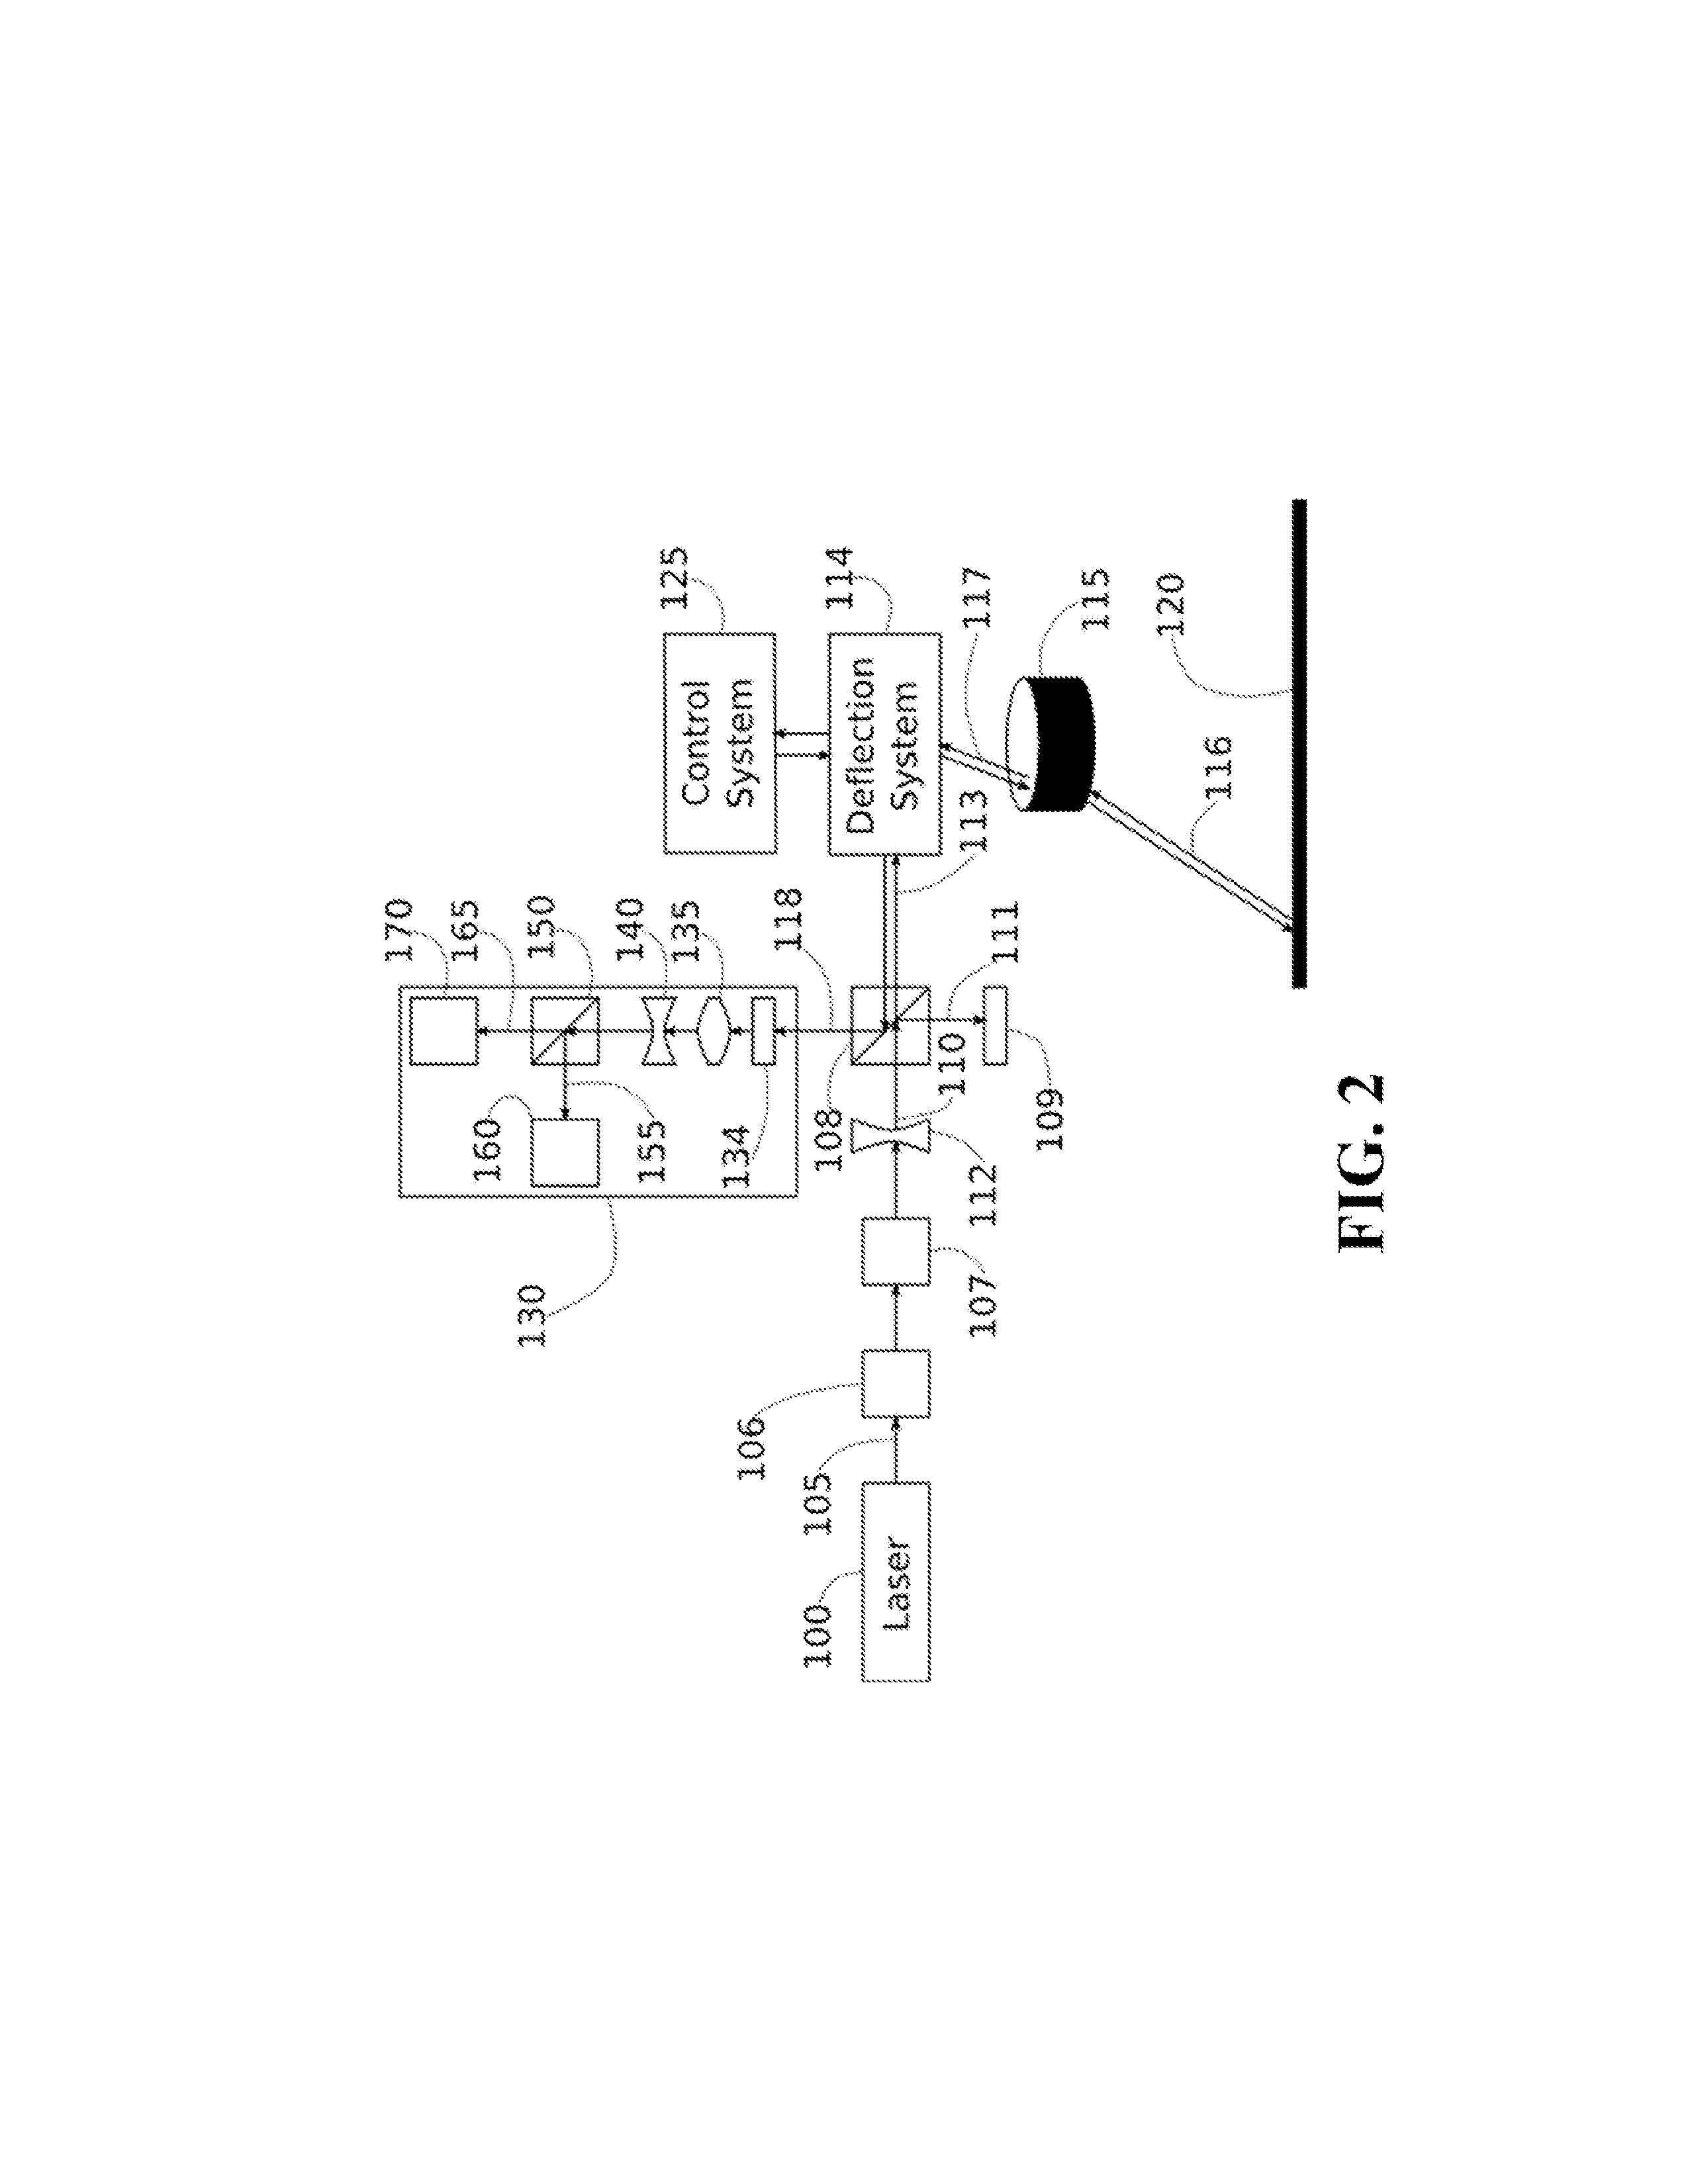 System and Method for Calibrating Laser Cutting Machines